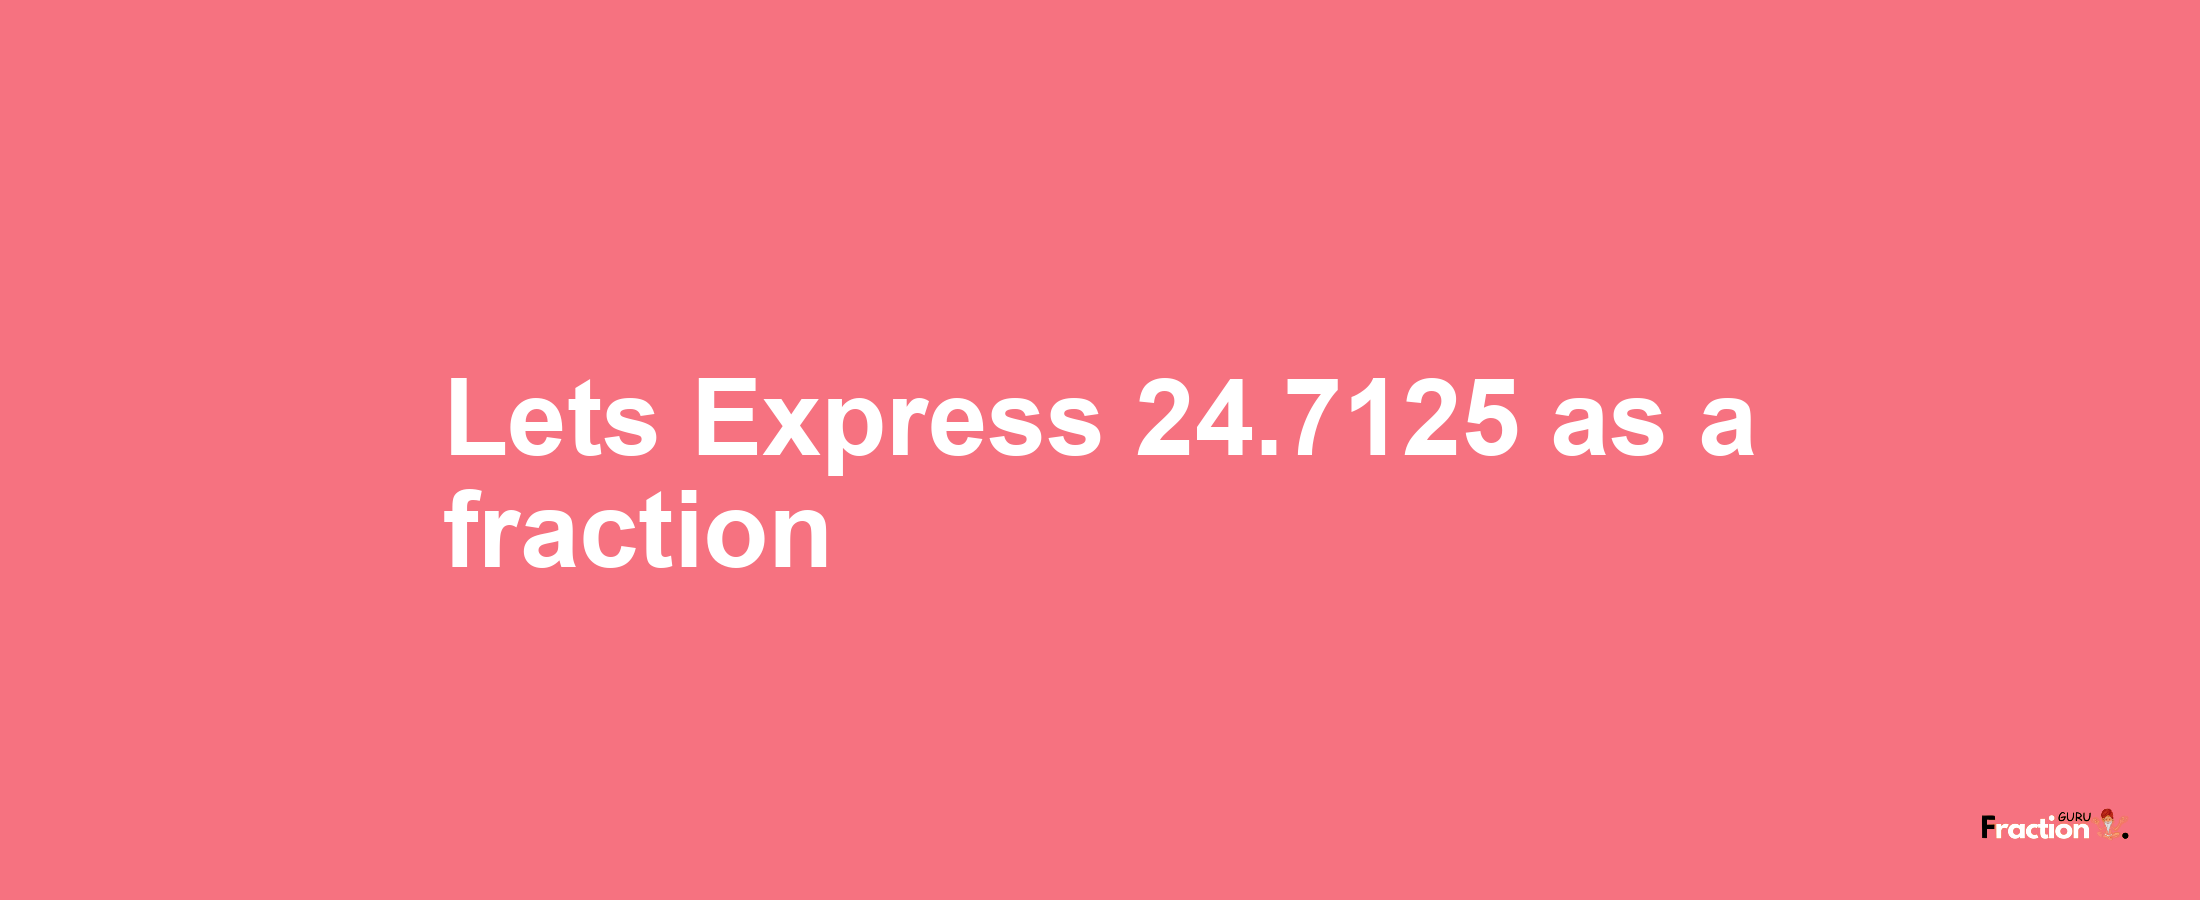 Lets Express 24.7125 as afraction